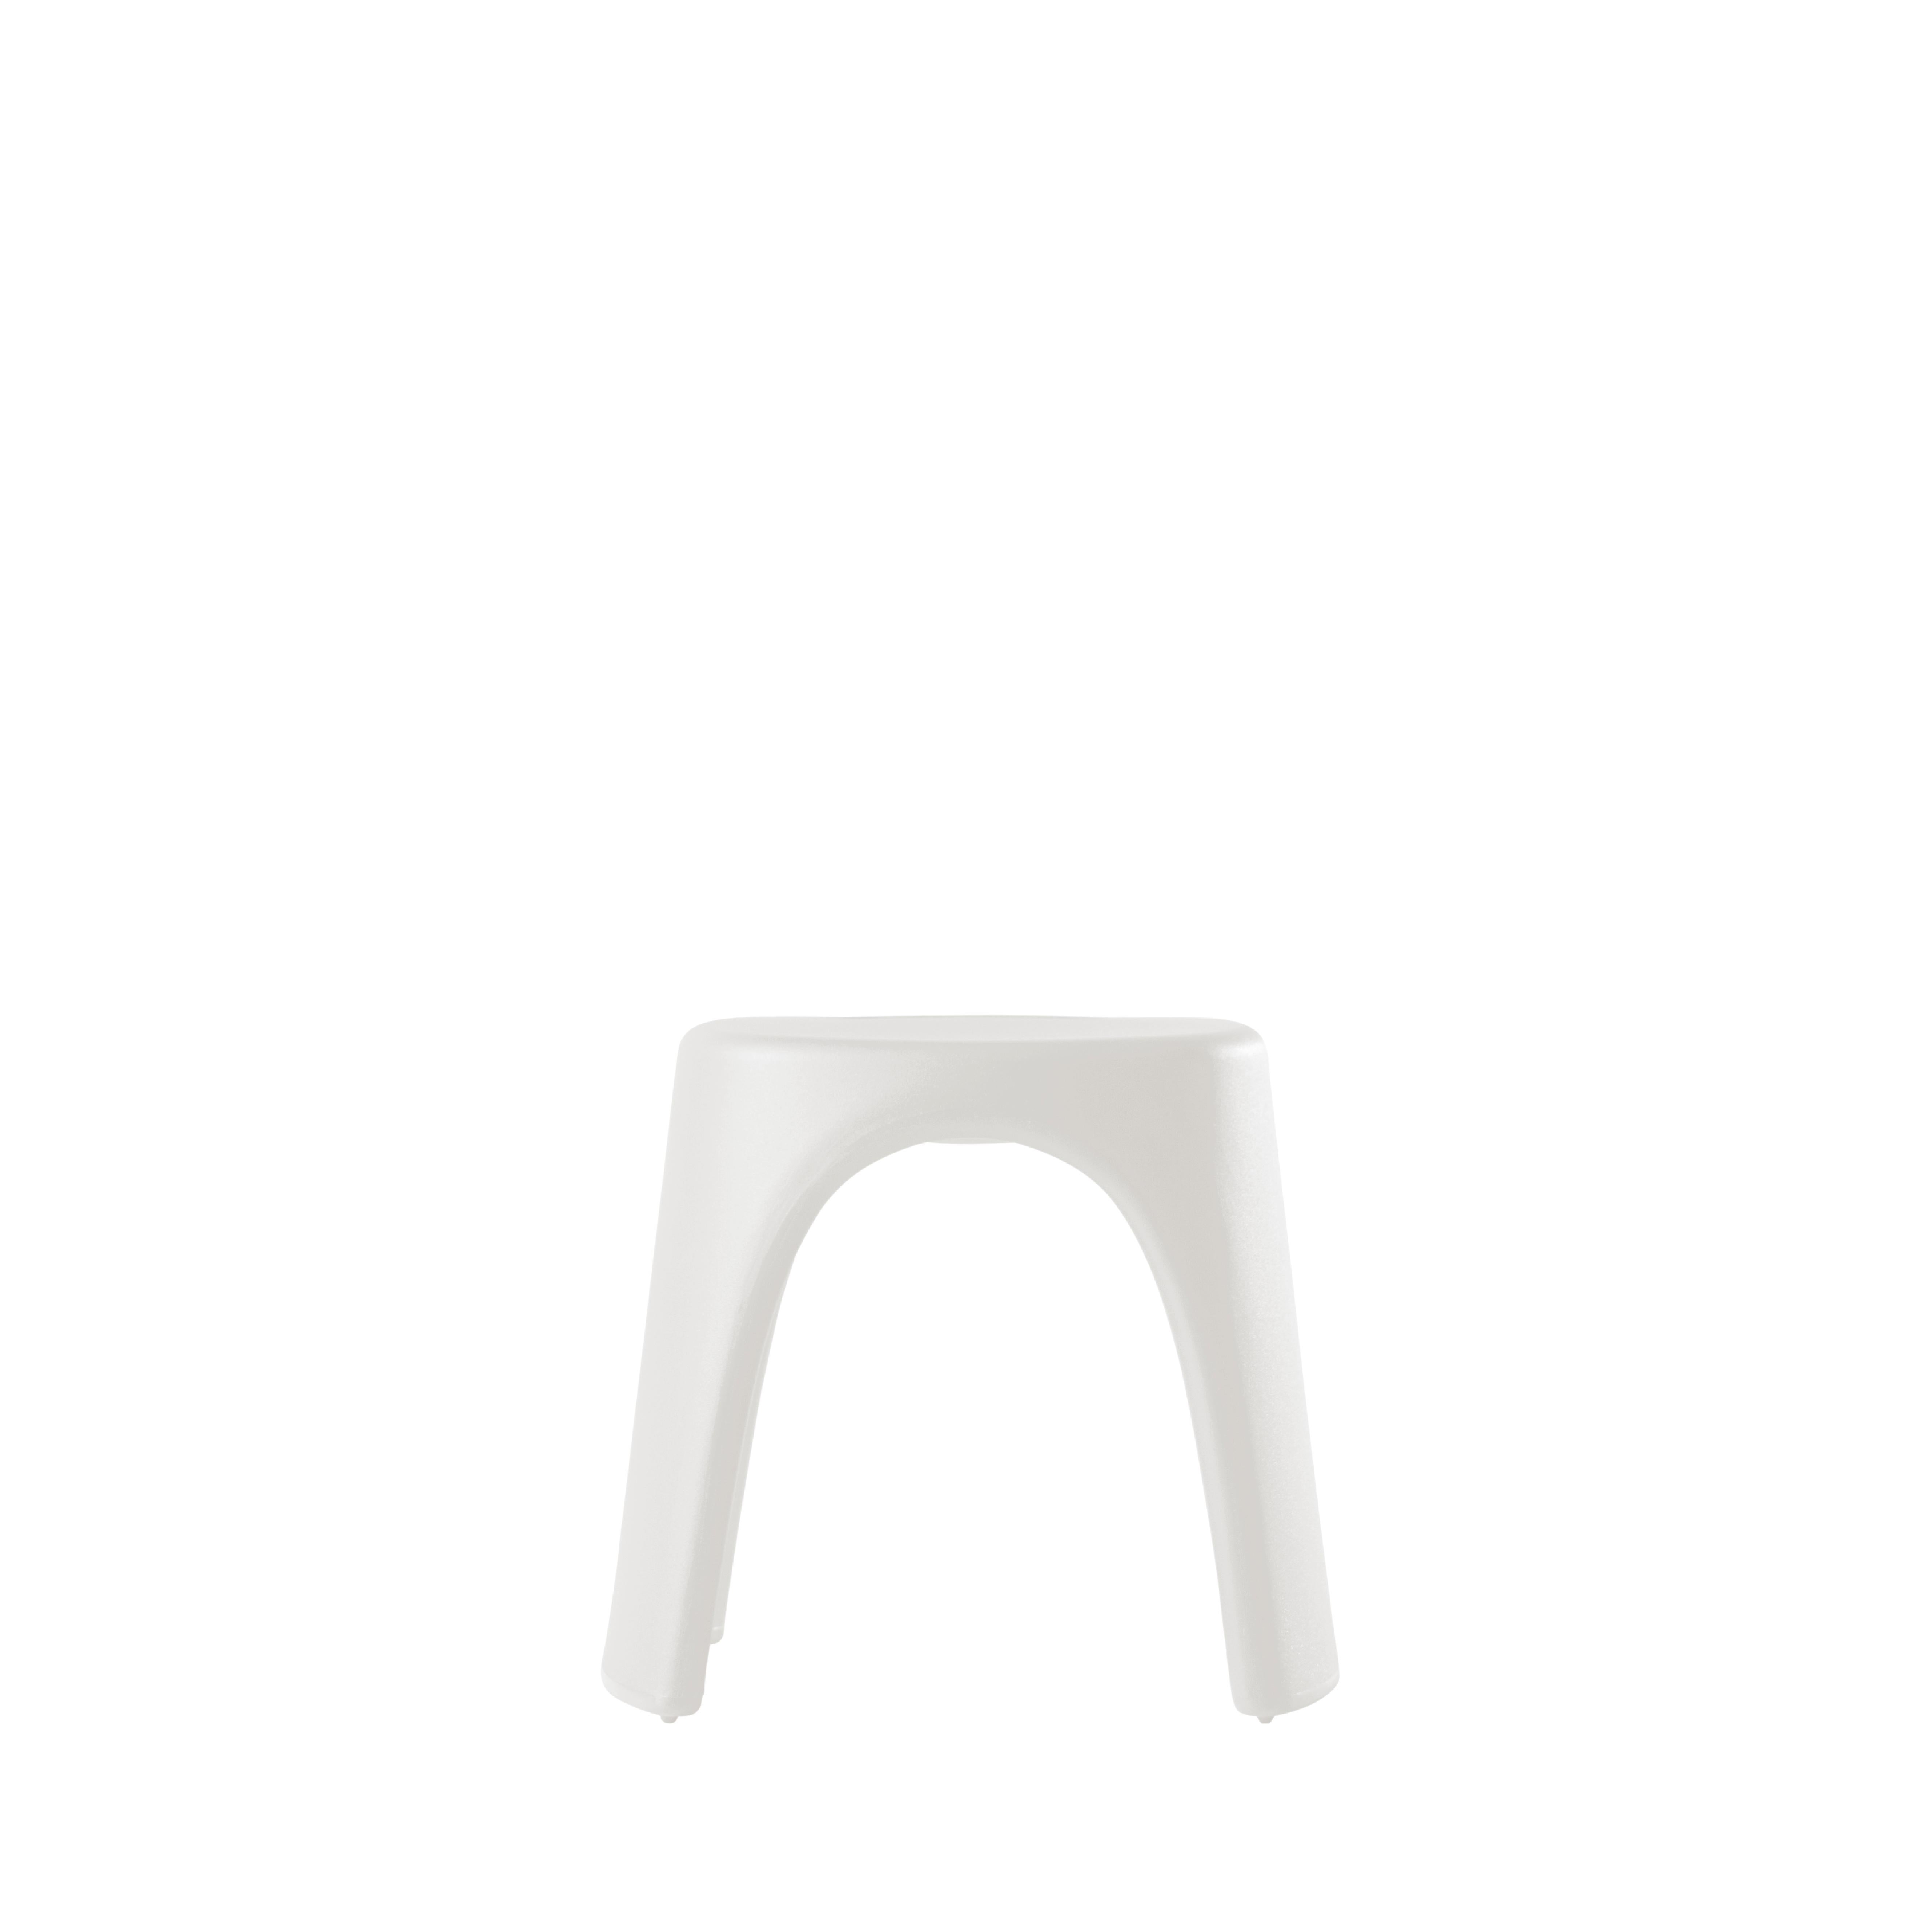 Safron Yellow Amélie Sgabello Stool by Italo Pertichini
Dimensions: D 40 x W 46 x H 43 cm.
Materials: Polyethylene.
Weight: 4 kg.

Available in a standard version and lacquered version. Prices may vary. Available in different color options. This